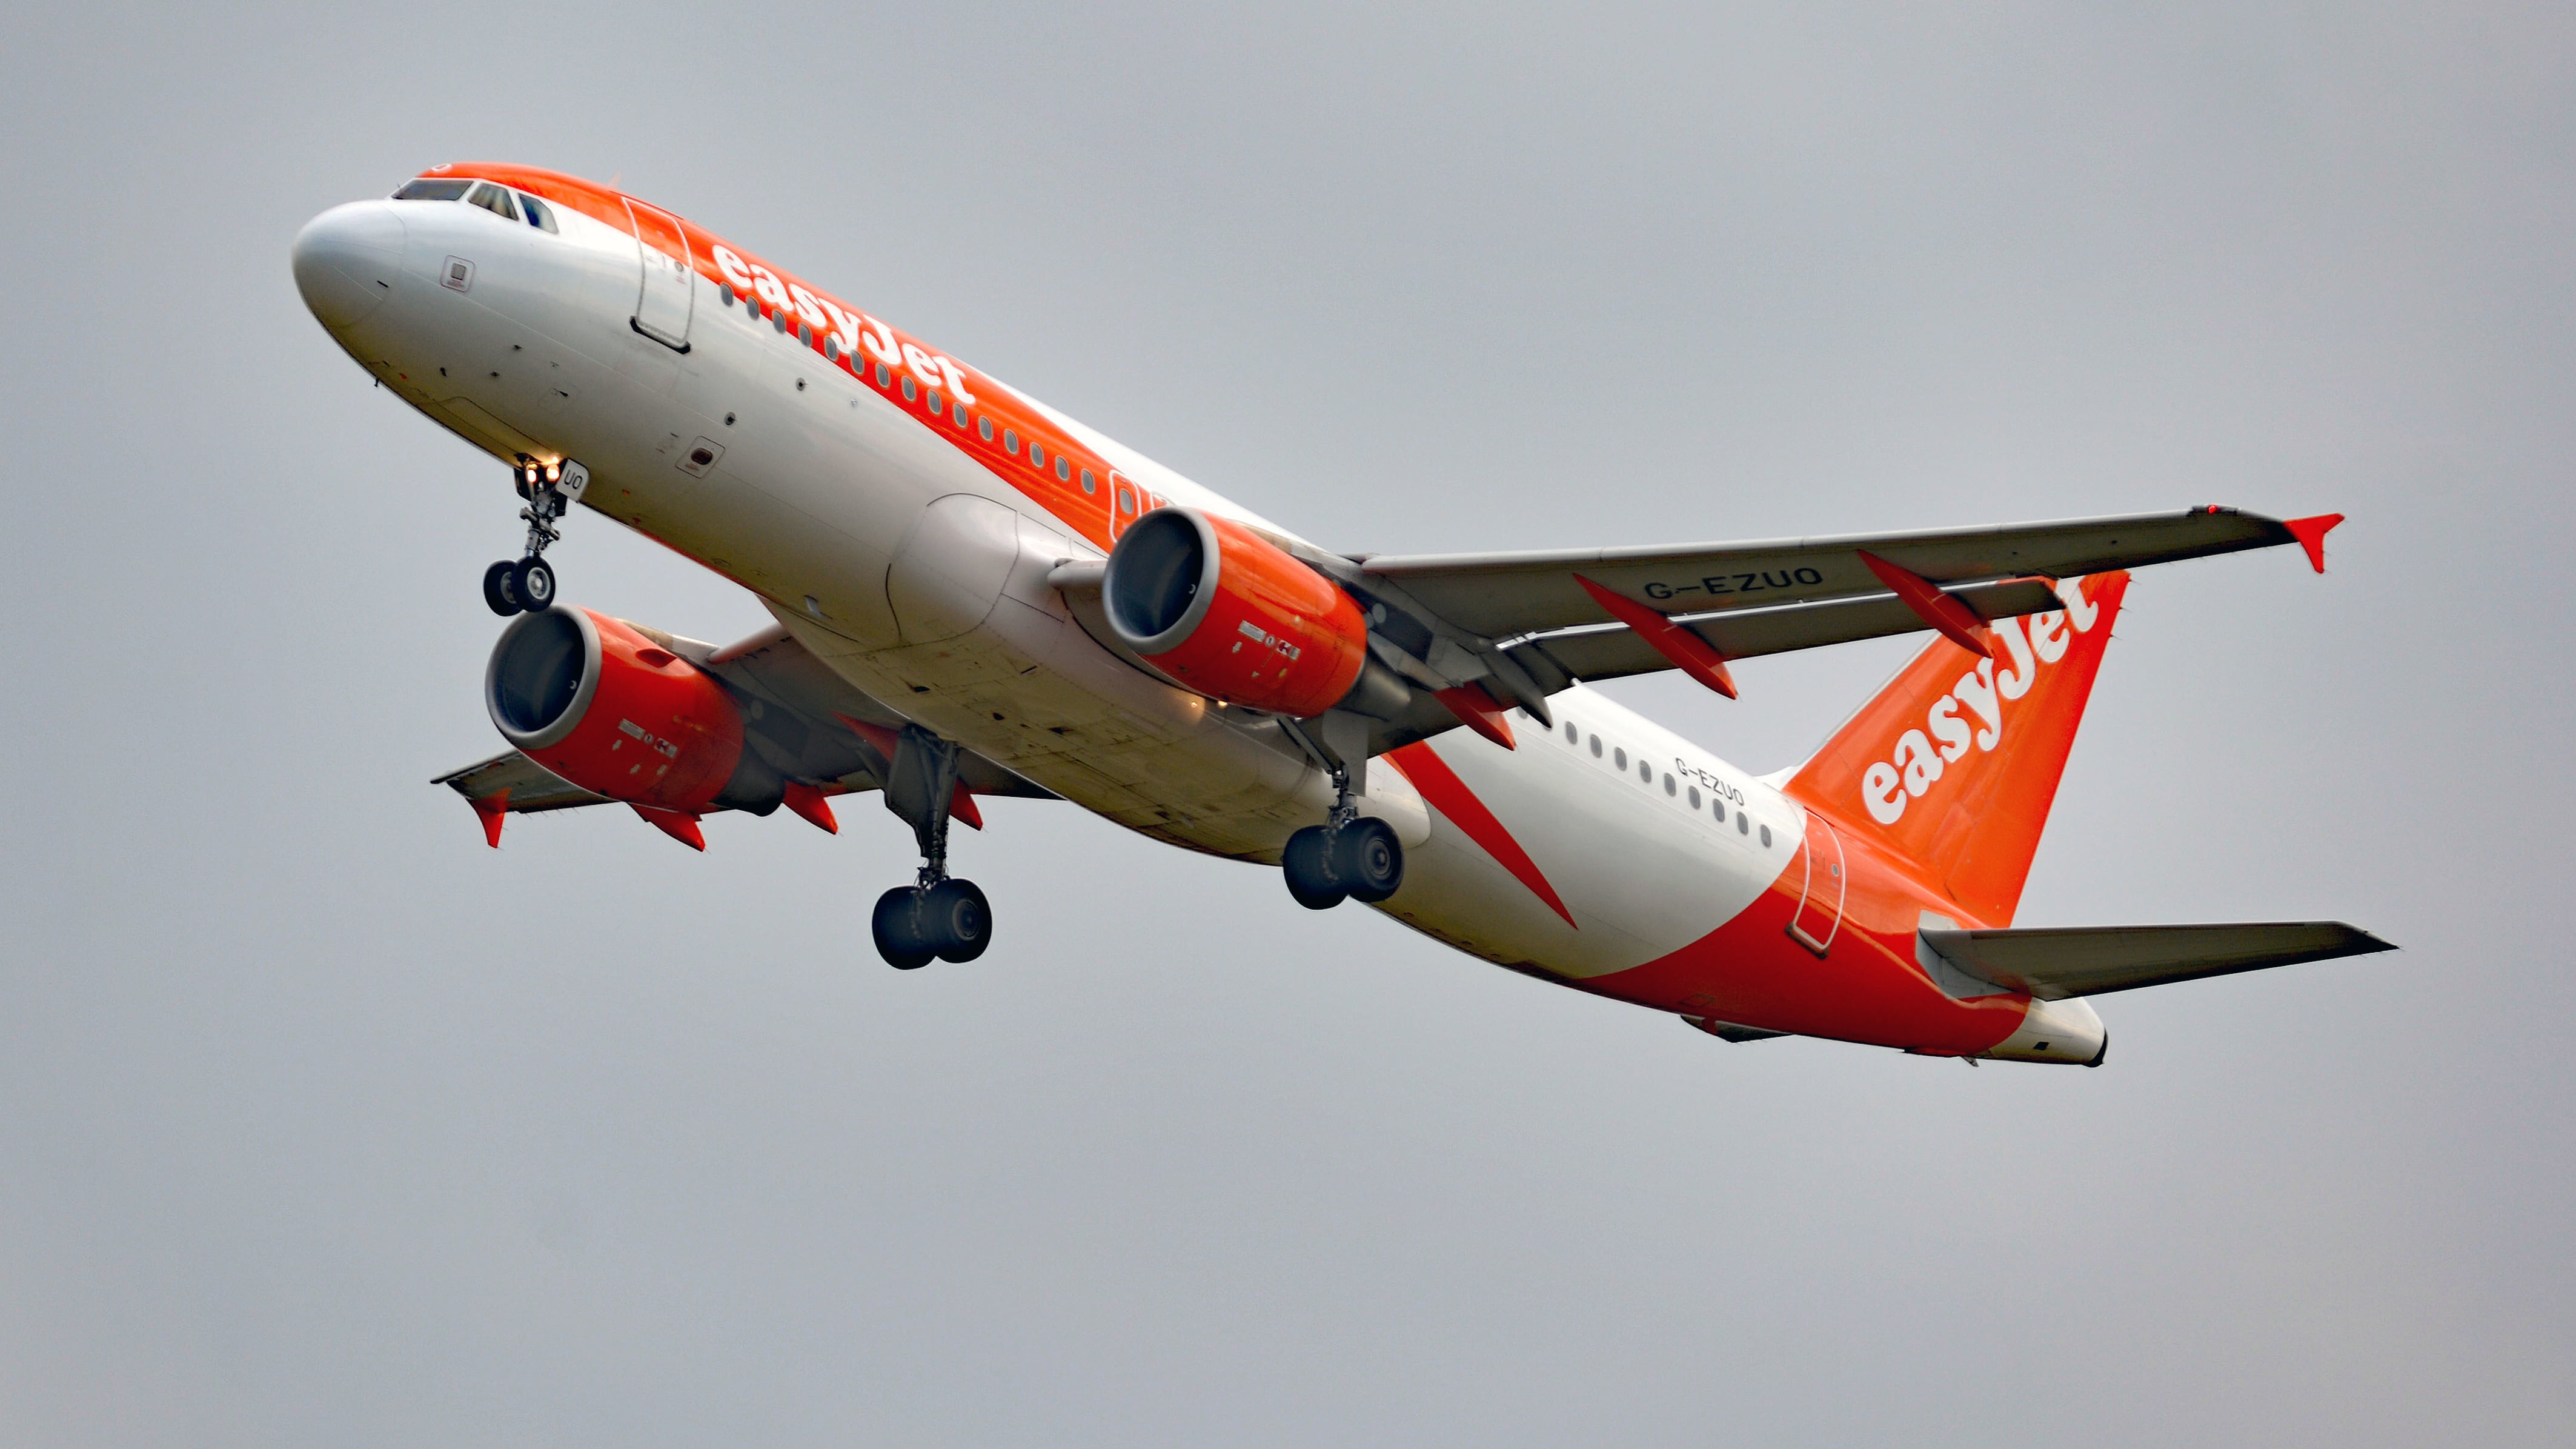 EasyJet’s new control centre will enable its operations teams to better manage flights using AI, the airline said